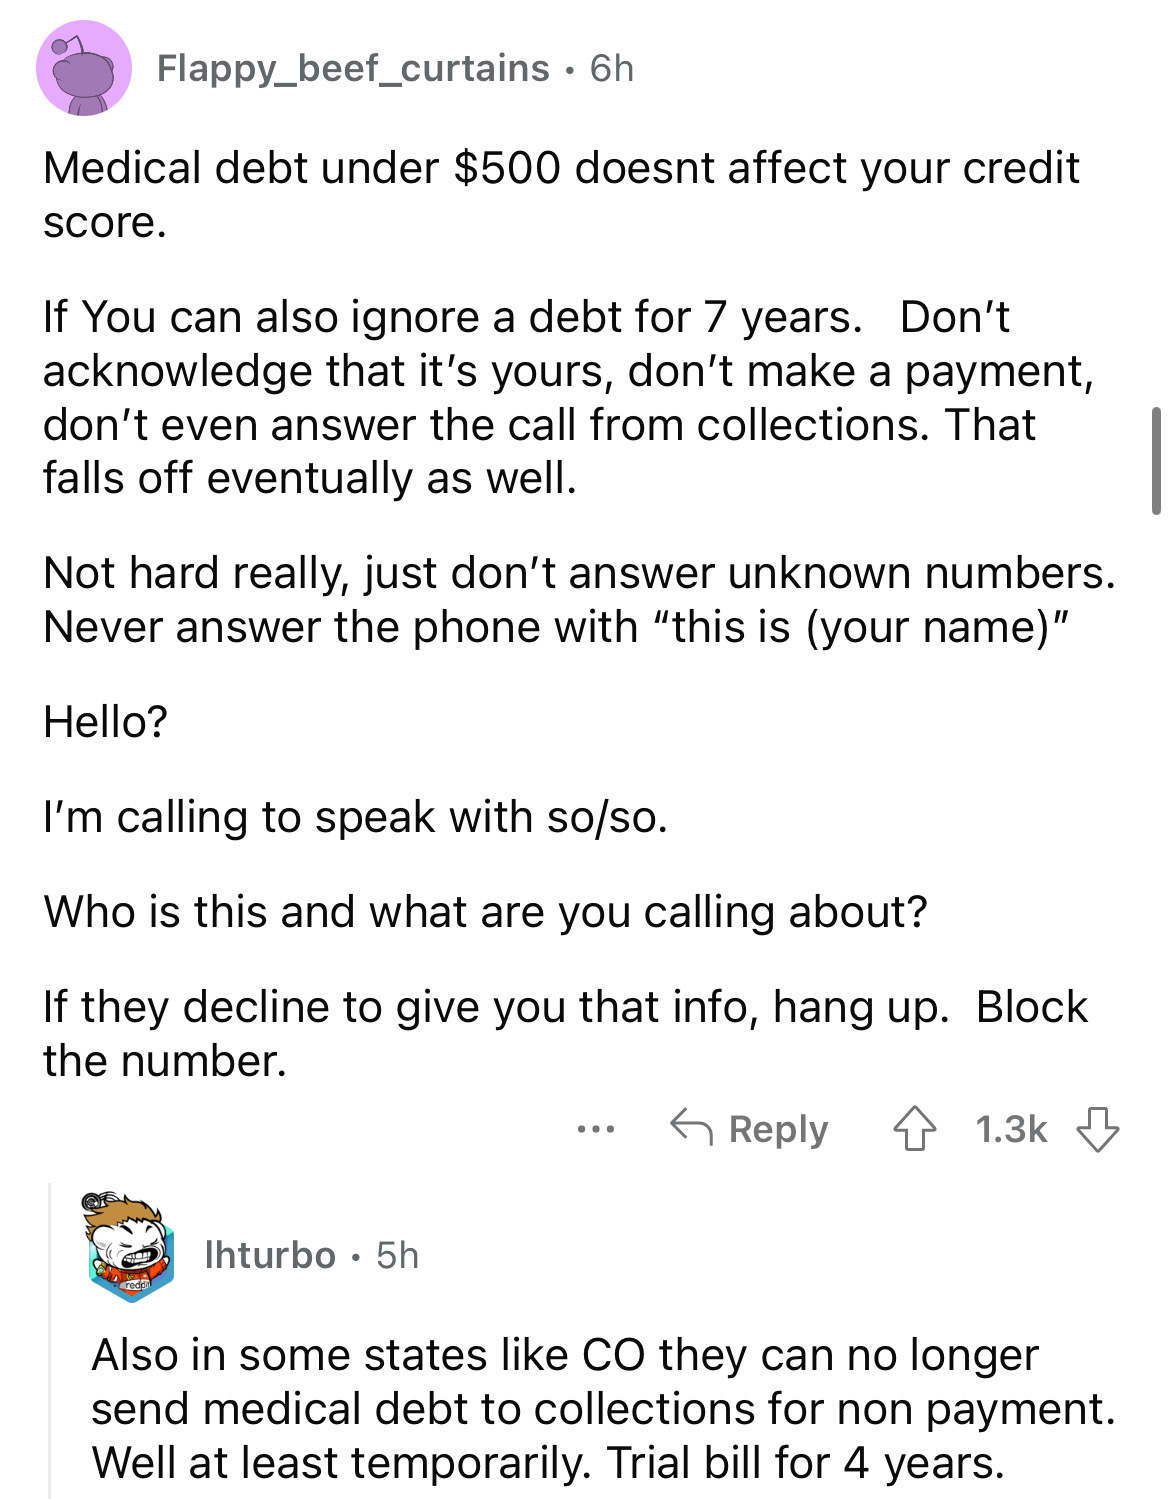 document - Flappy_beef_curtains 6h Medical debt under $500 doesnt affect your credit score. If You can also ignore a debt for 7 years. Don't acknowledge that it's yours, don't make a payment, don't even answer the call from collections. That falls off eve